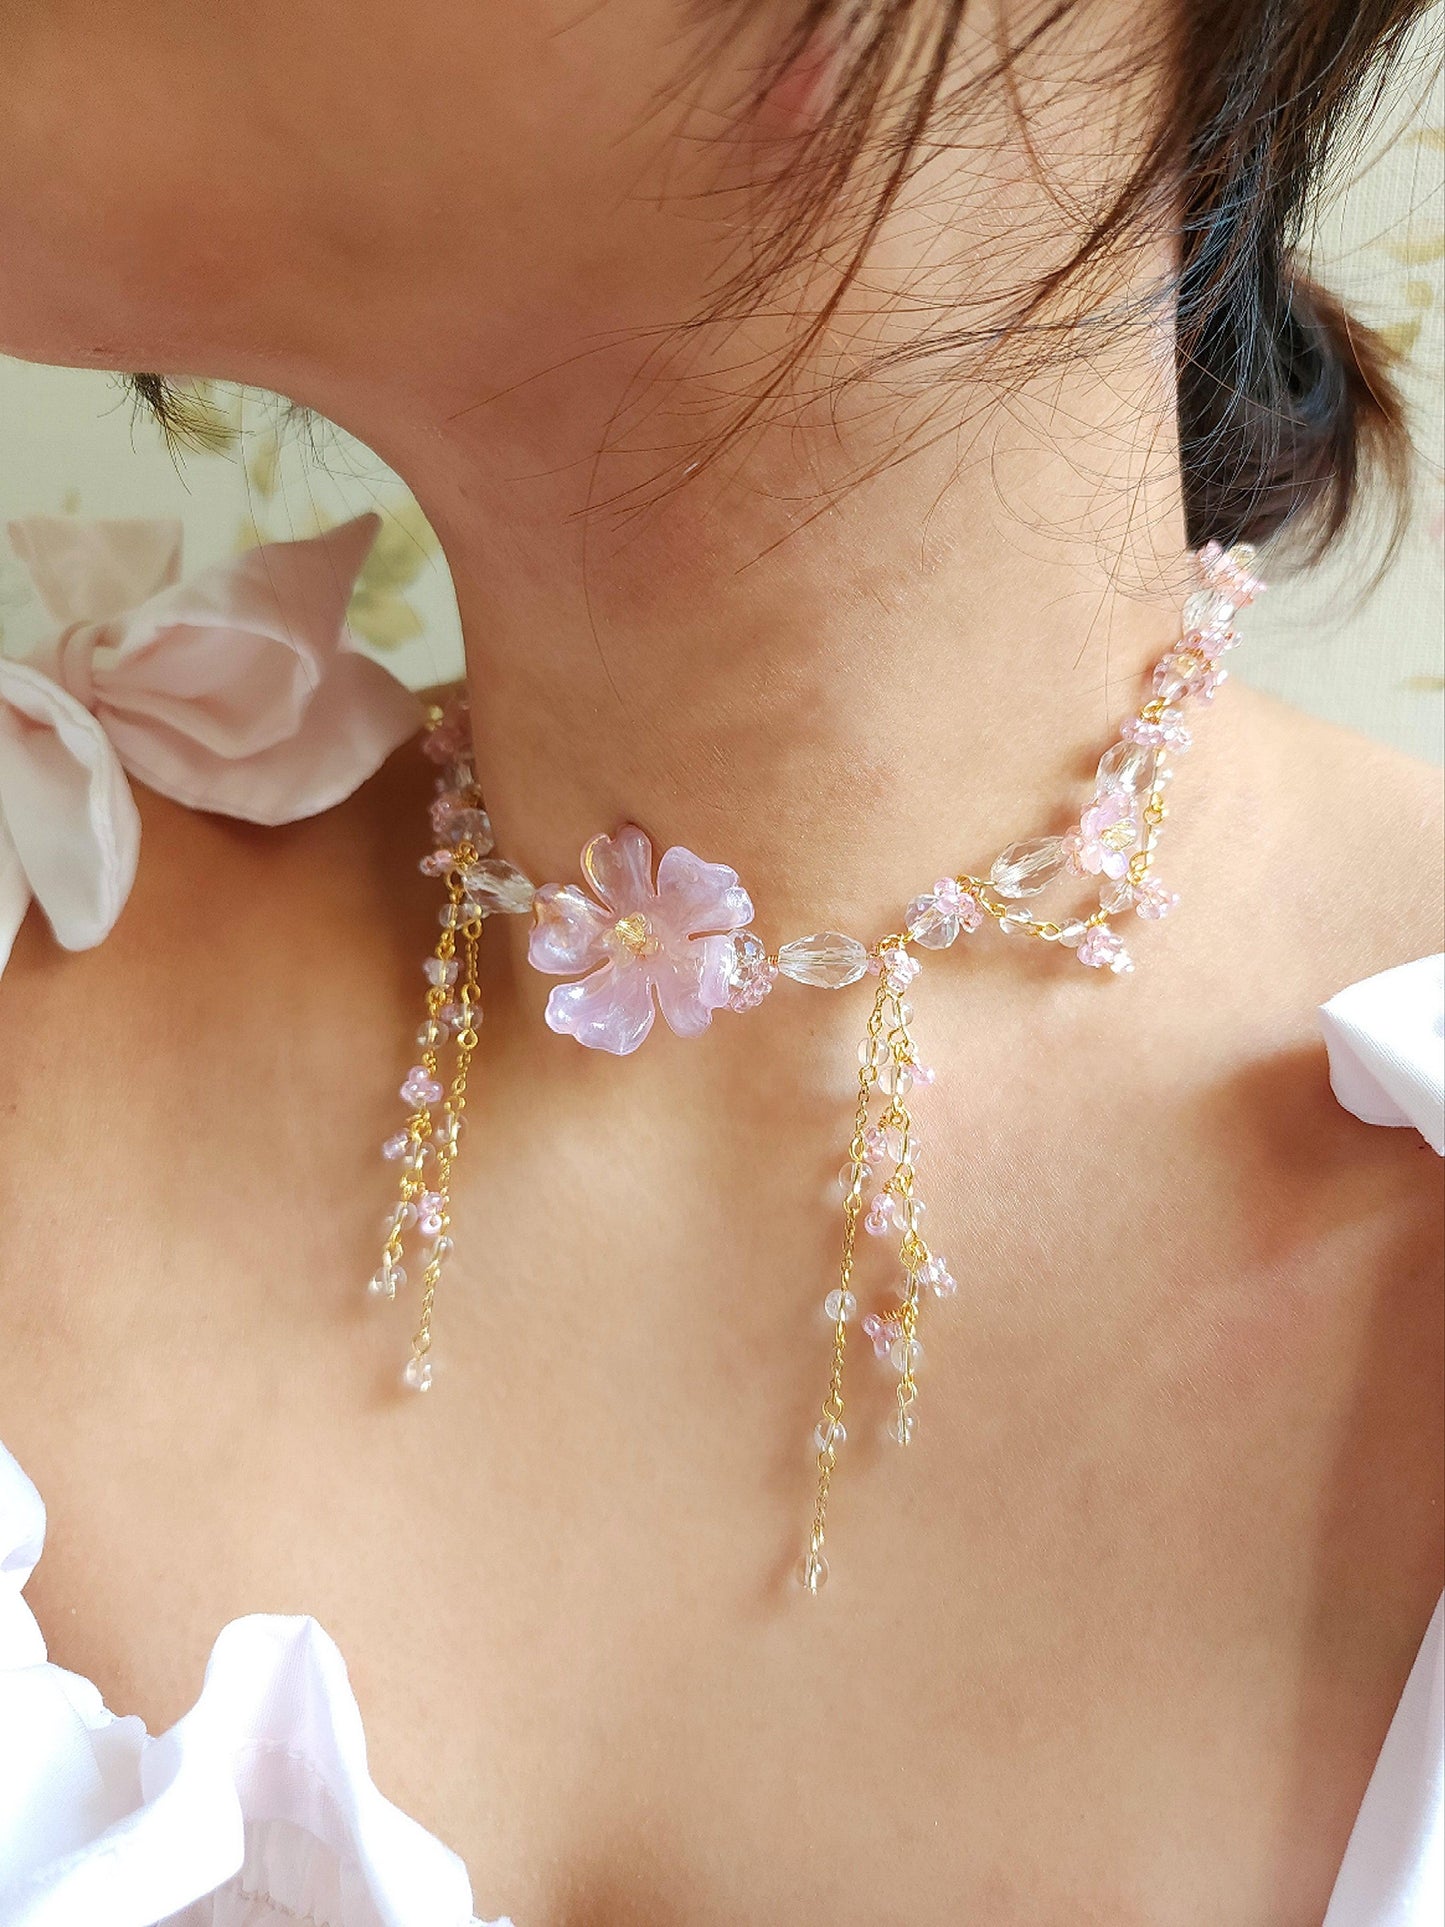 Camelia by the Lake Choker - By Cocoyu